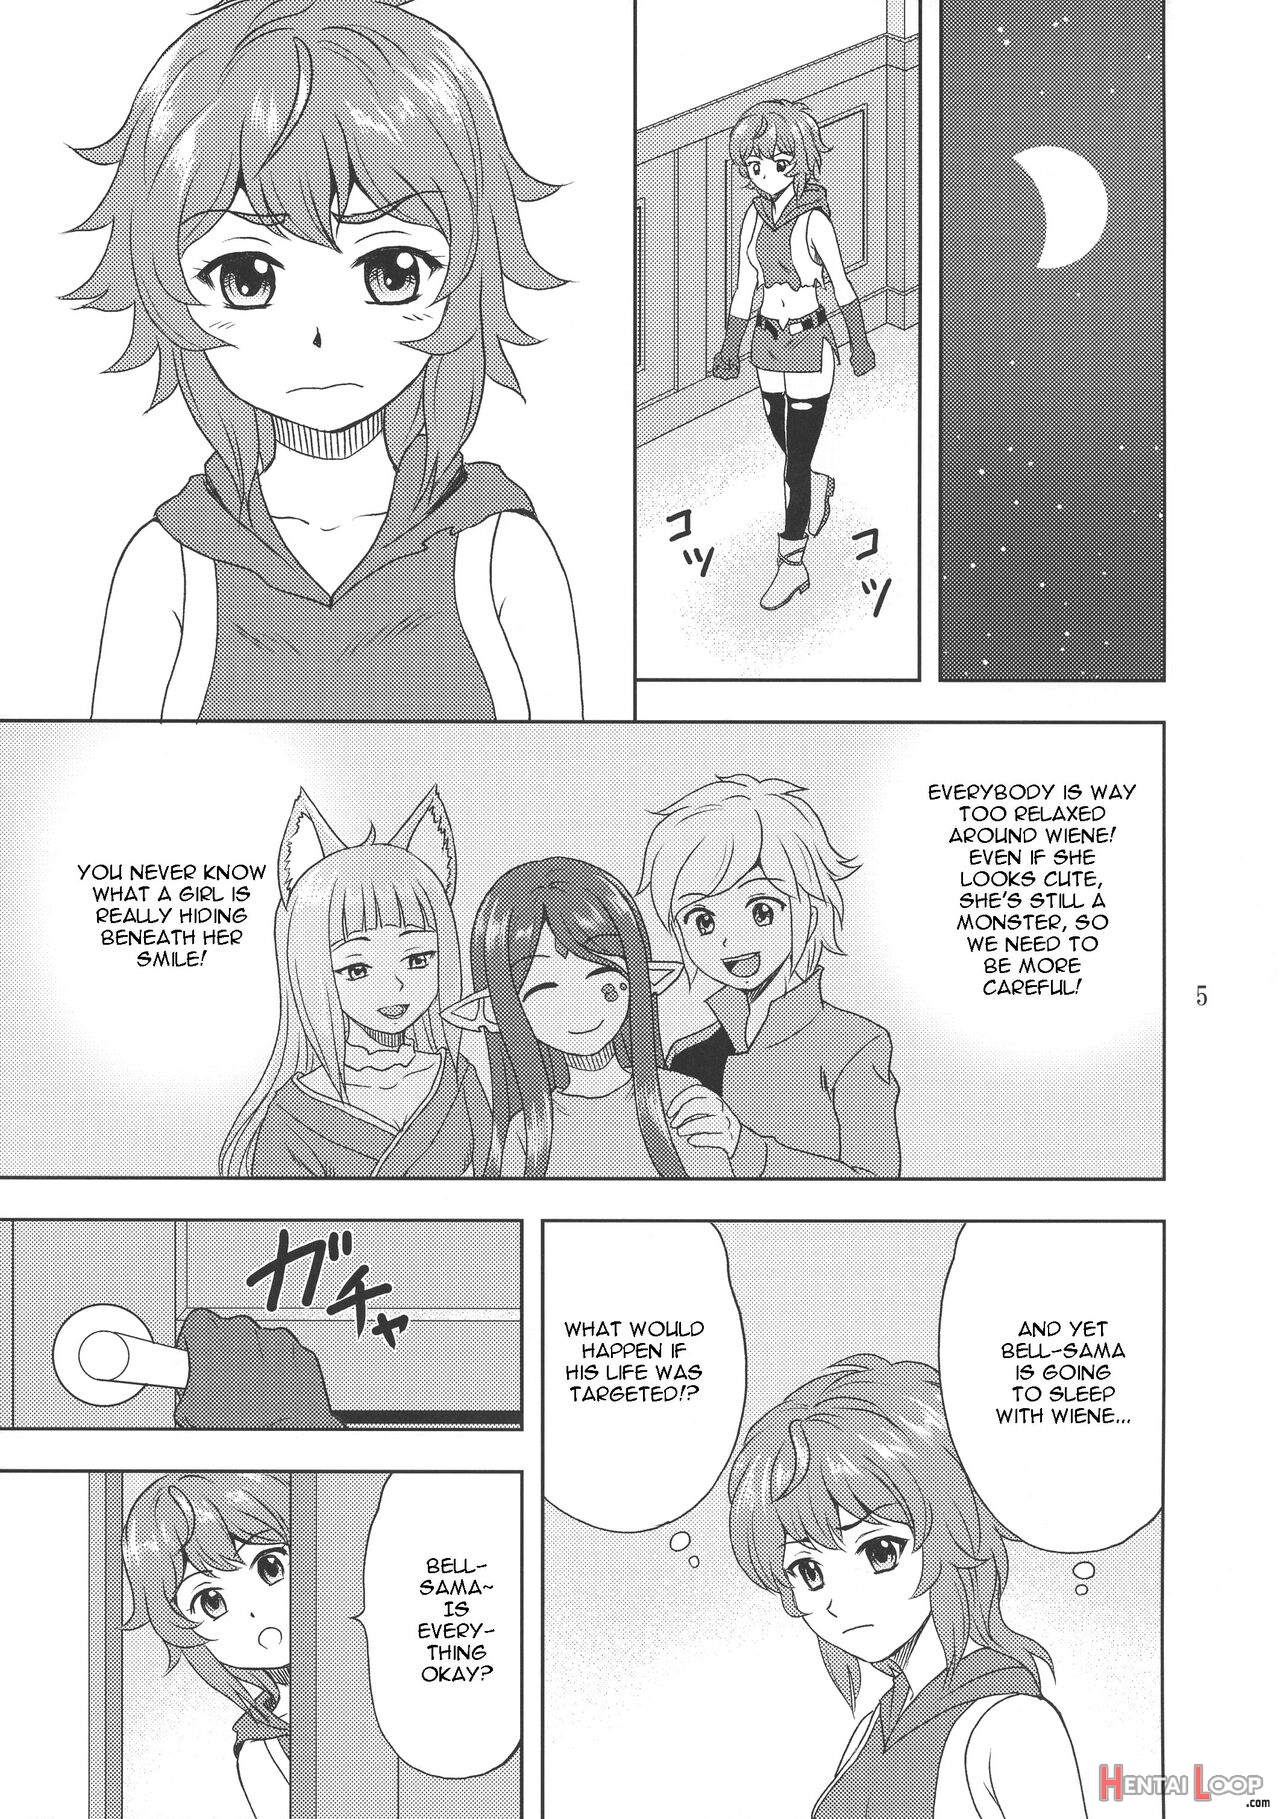 We Love You, Bell-sama! page 6